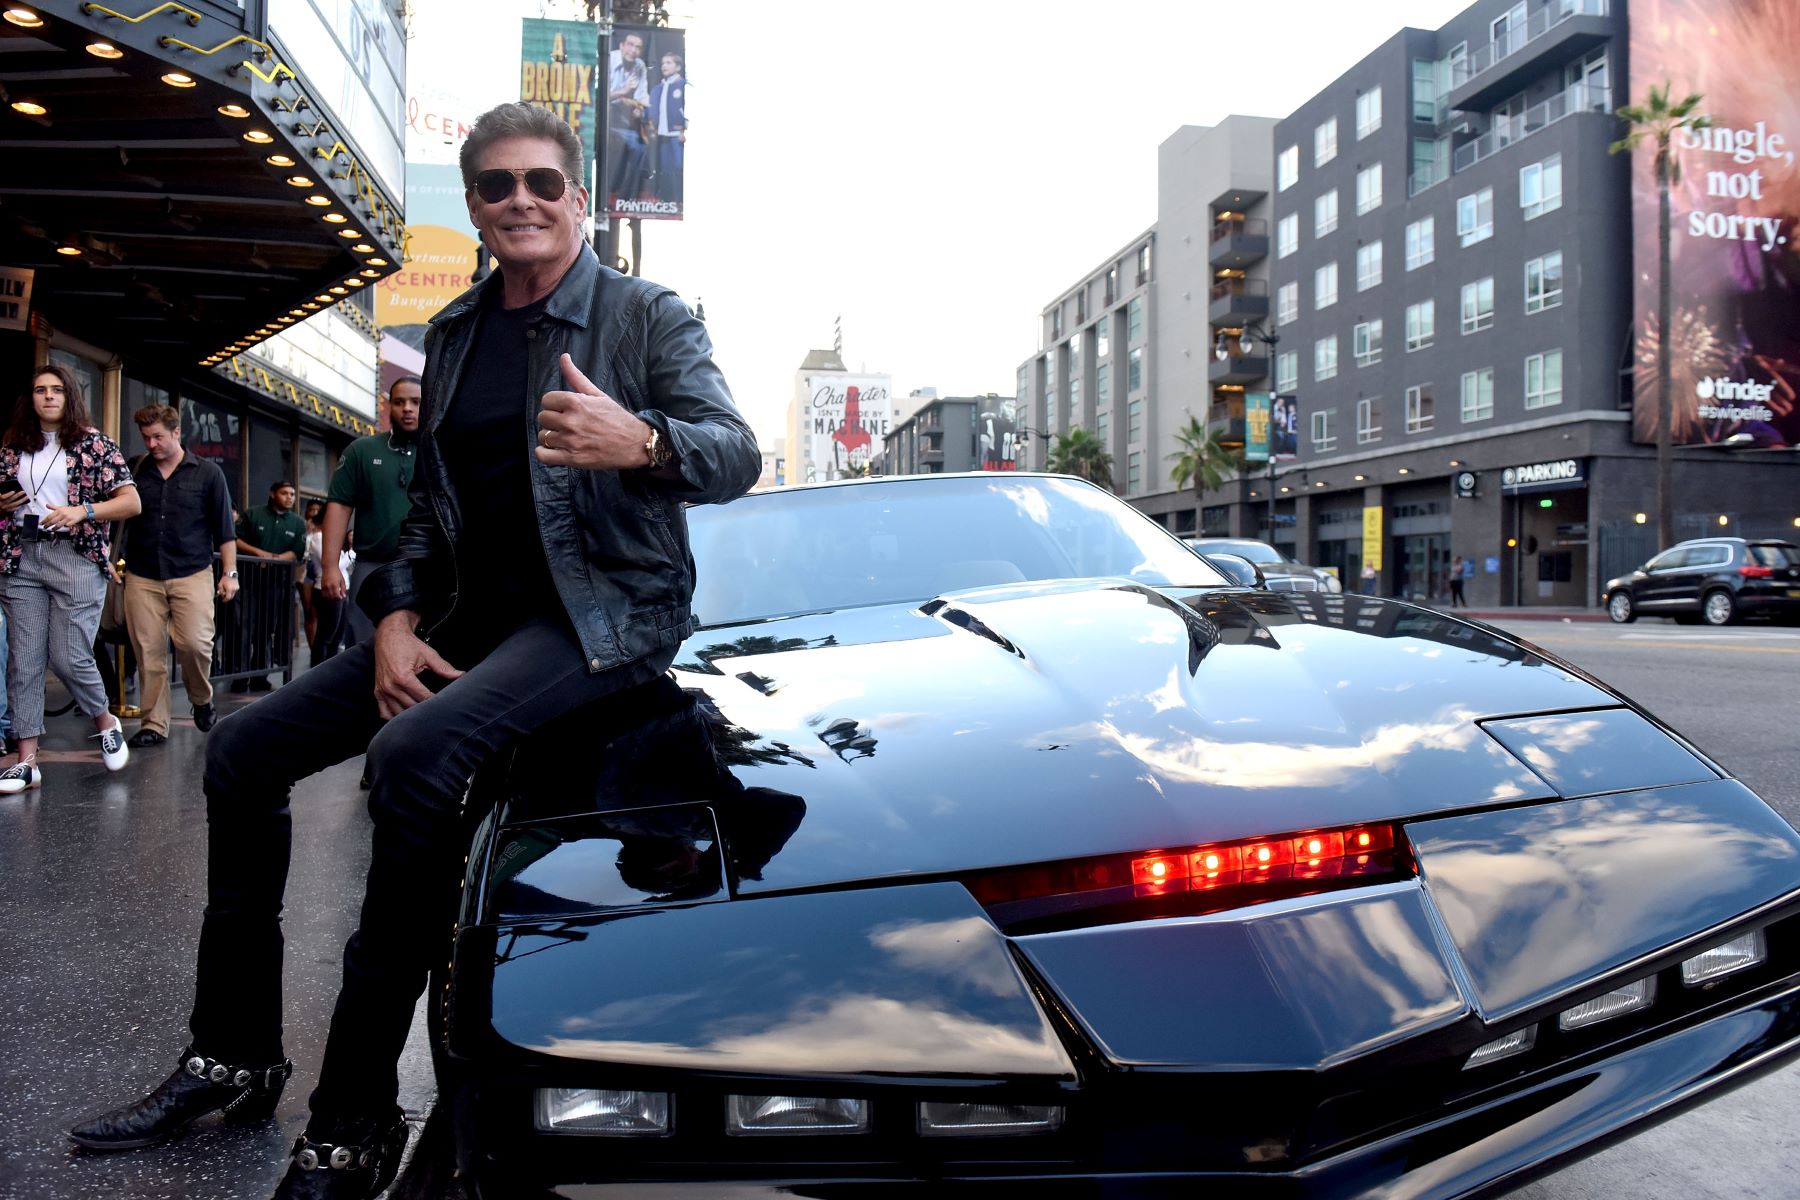 David Hasselhoff and KITT from 'Knight Rider' attending the Strange 80's benefit concert in Los Angeles, California